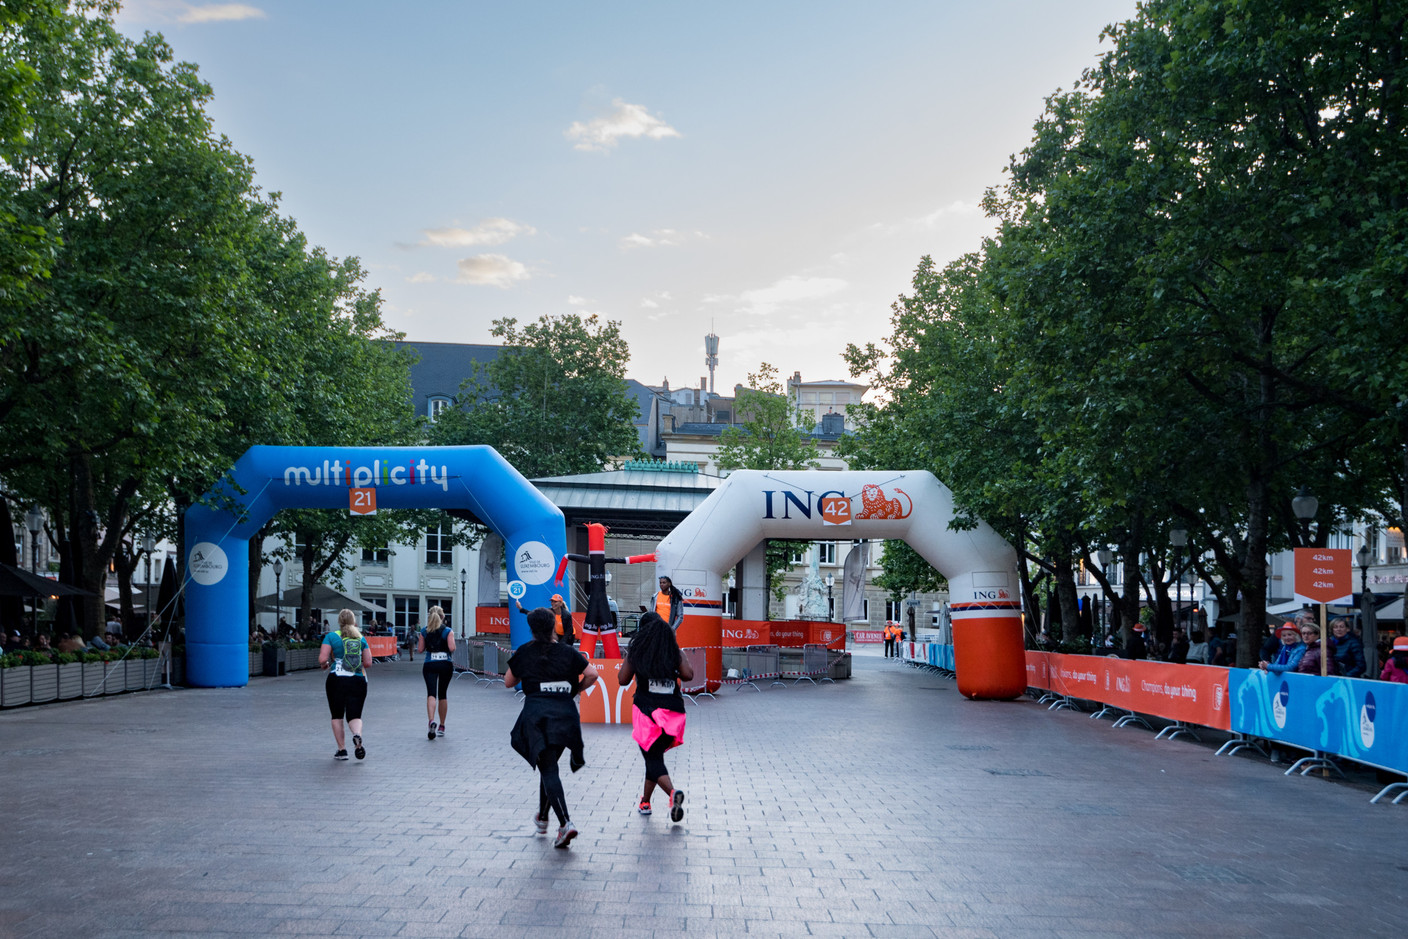 A total of 12,000 runners took part in the event according to ING’s website with an estimated 100,000 spectators cheering on the participants.  Nader Ghavami